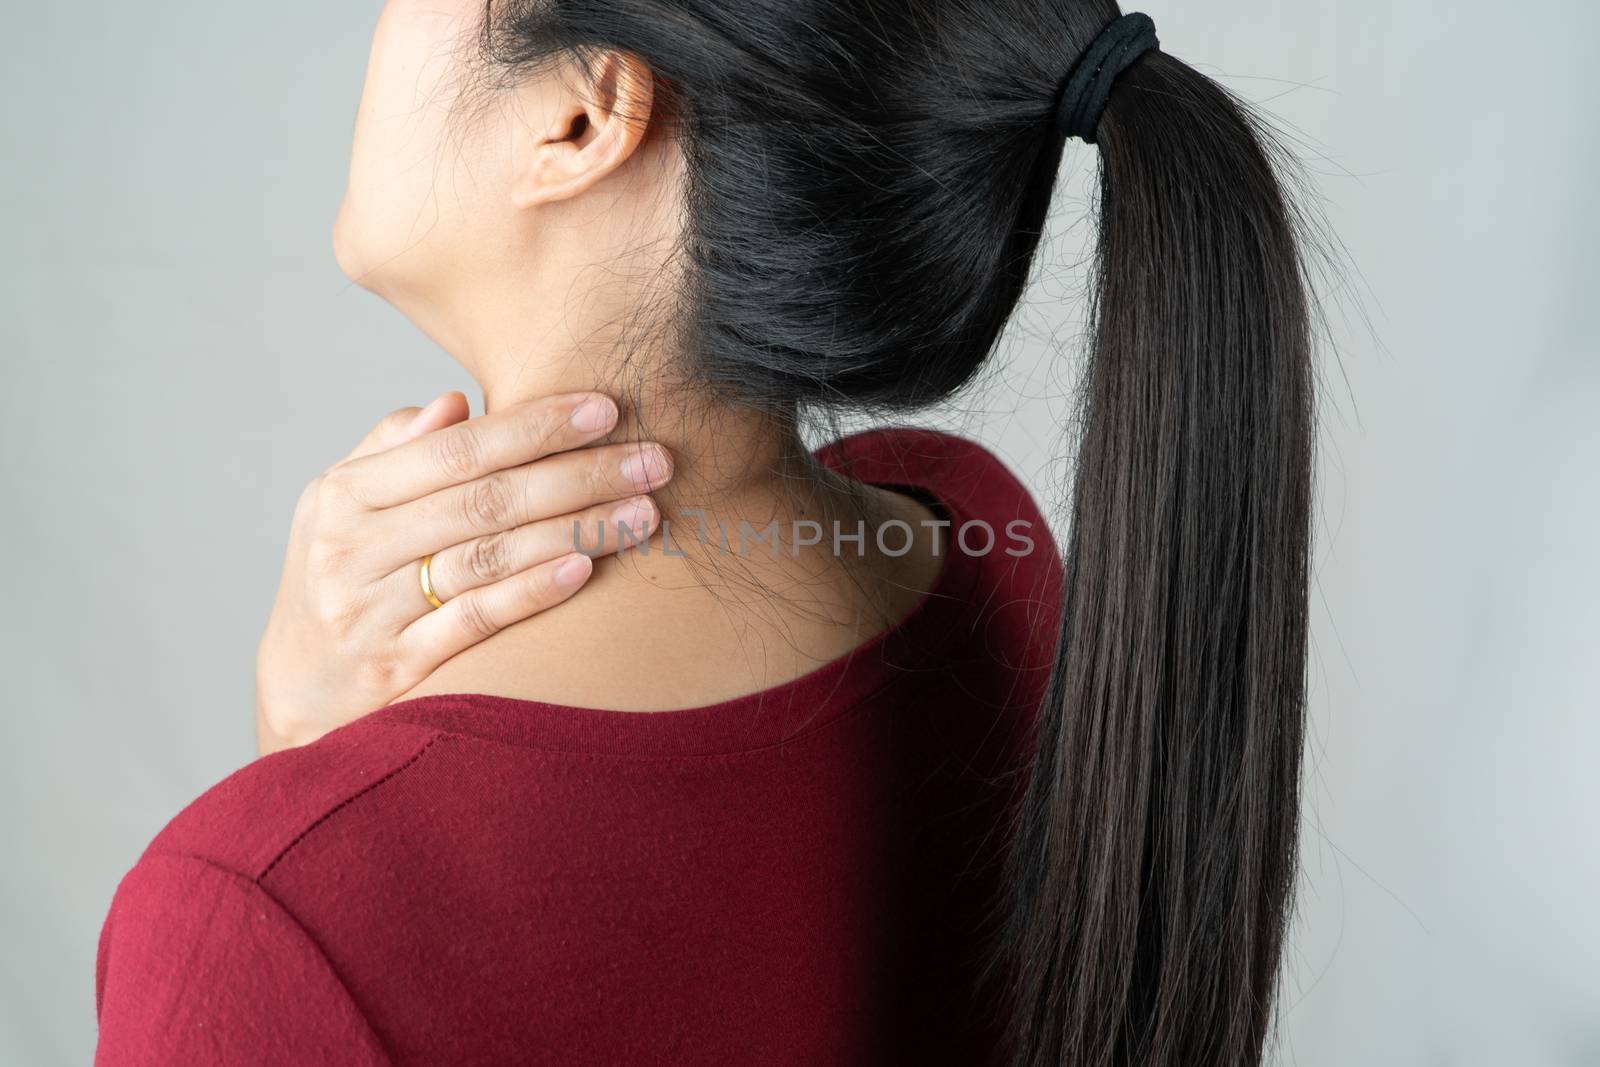 neck and shoulder pain, young women injury, healthcare and medical concept